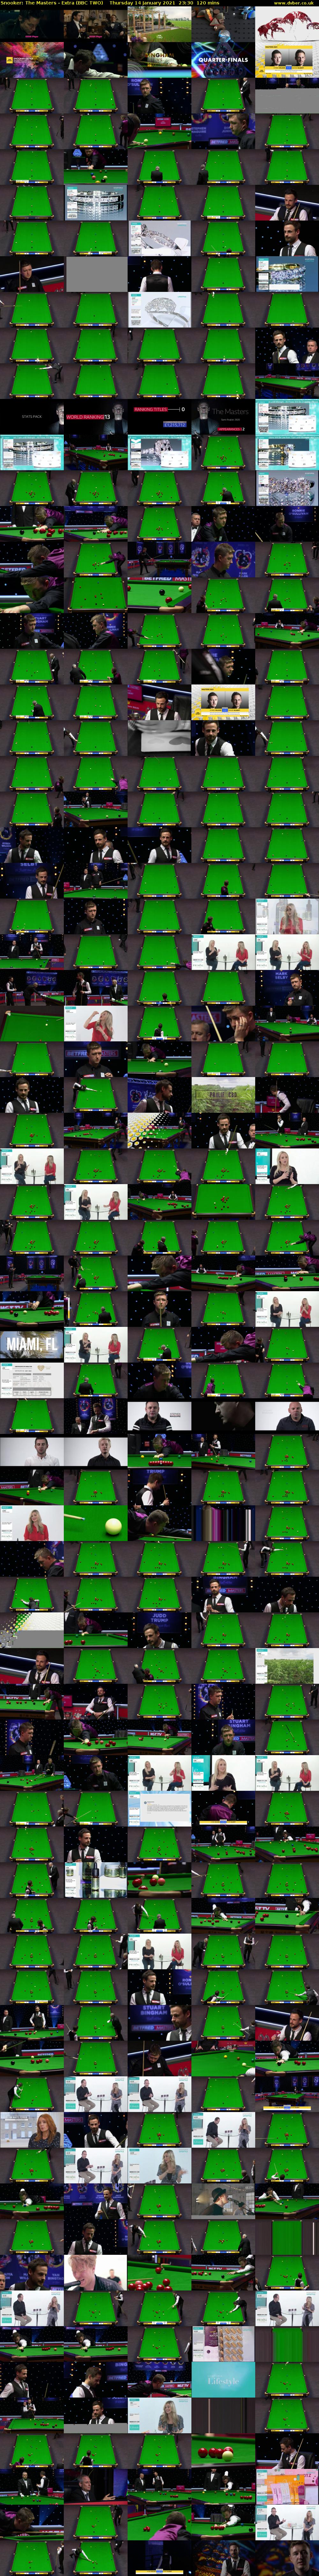 Snooker: The Masters - Extra (BBC TWO) Thursday 14 January 2021 23:30 - 01:30